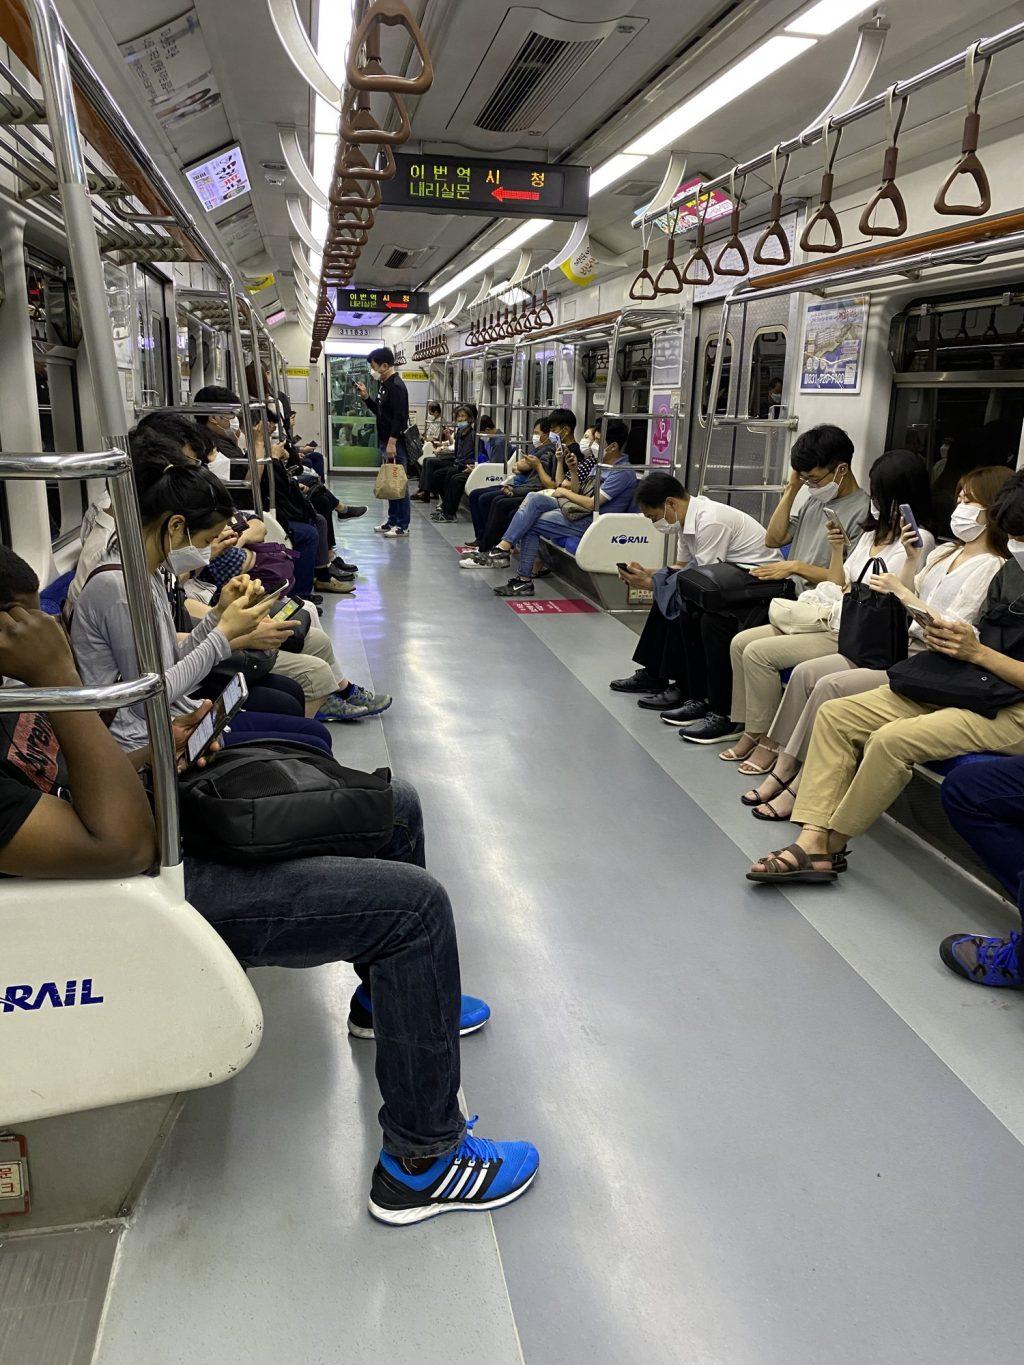 On Sept. 1, two days after the Seoul government raised COVID-19 regulations to level two-and-a-half, the subways remain crowded. Nearly everyone wore a mask while silently using their phones.